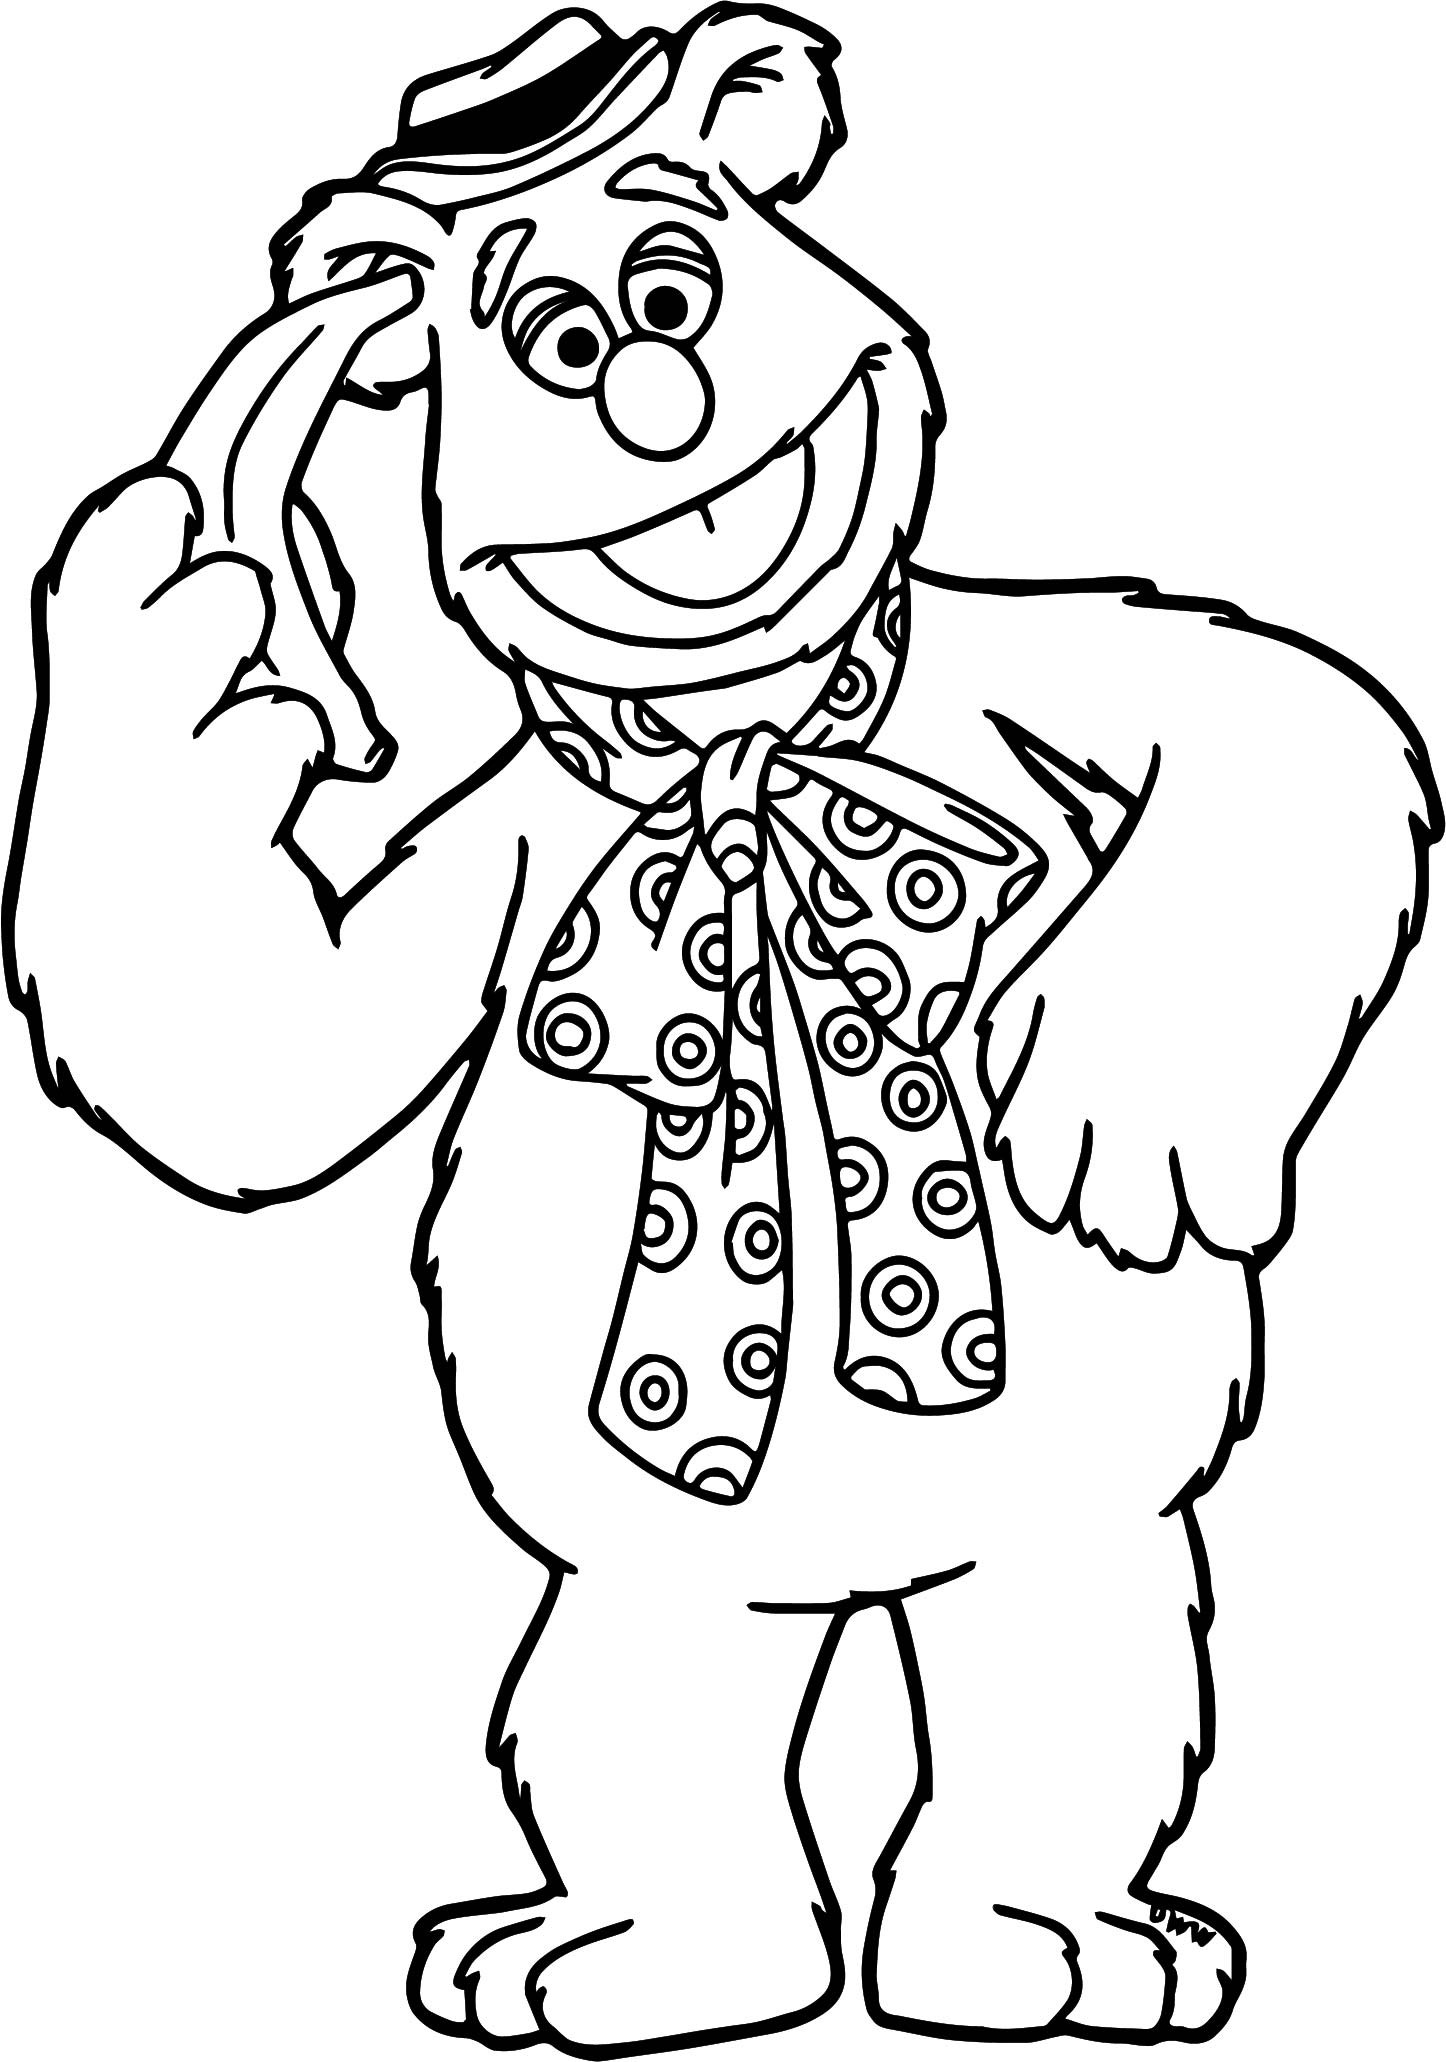 Muppets Coloring Pages
 The Muppets Fozzie Coloring Pages